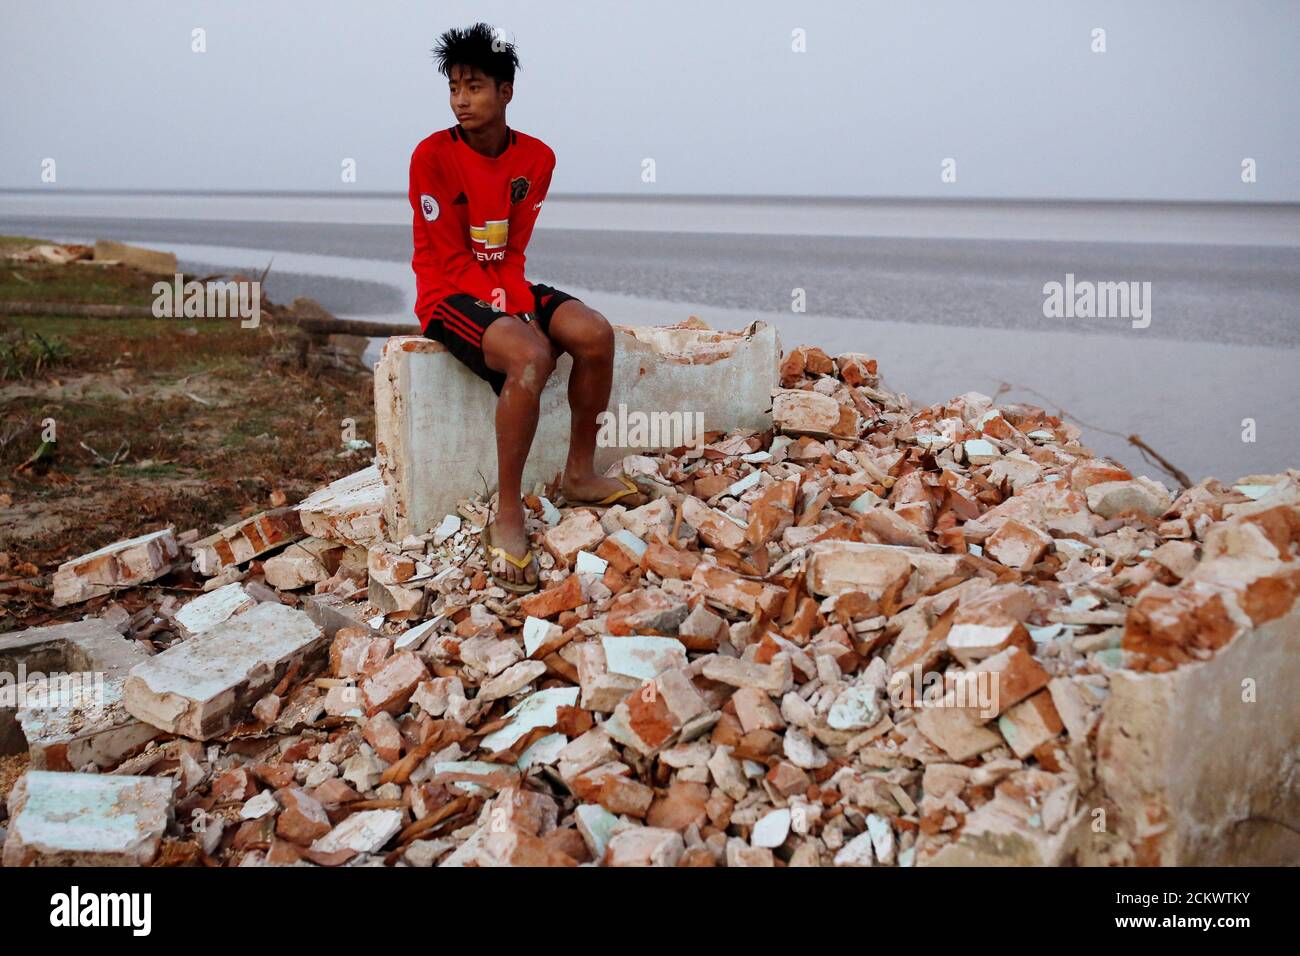 Myo Zaw, 15, sits at the ruins of a monastery after the riverbank it was located on collapsed into the water in Ta Dar U village, Bago, Myanmar, February 5, 2020. Photo taken on February 5, 2020. REUTERS/Ann Wang Stock Photo